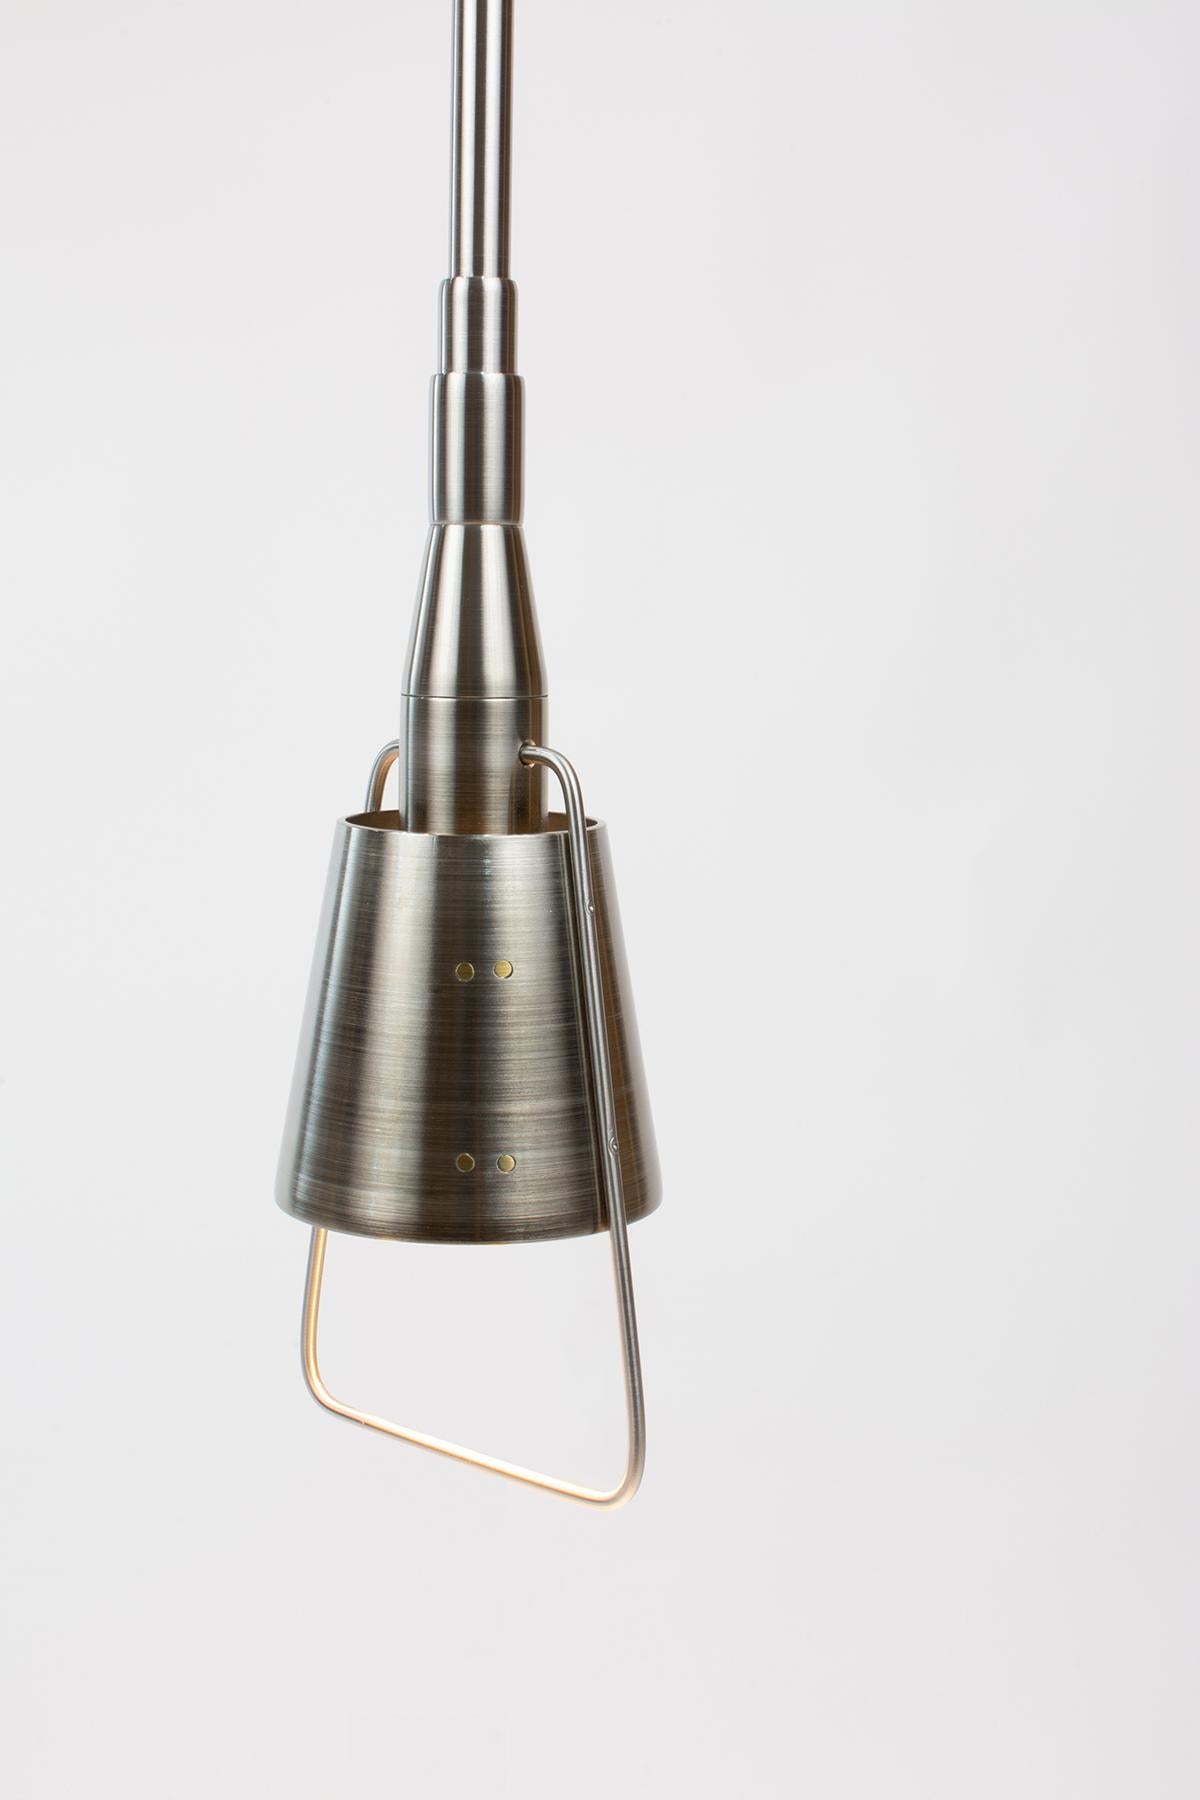 Contemporary Industrial steel pendant lamp with suspension option For Sale